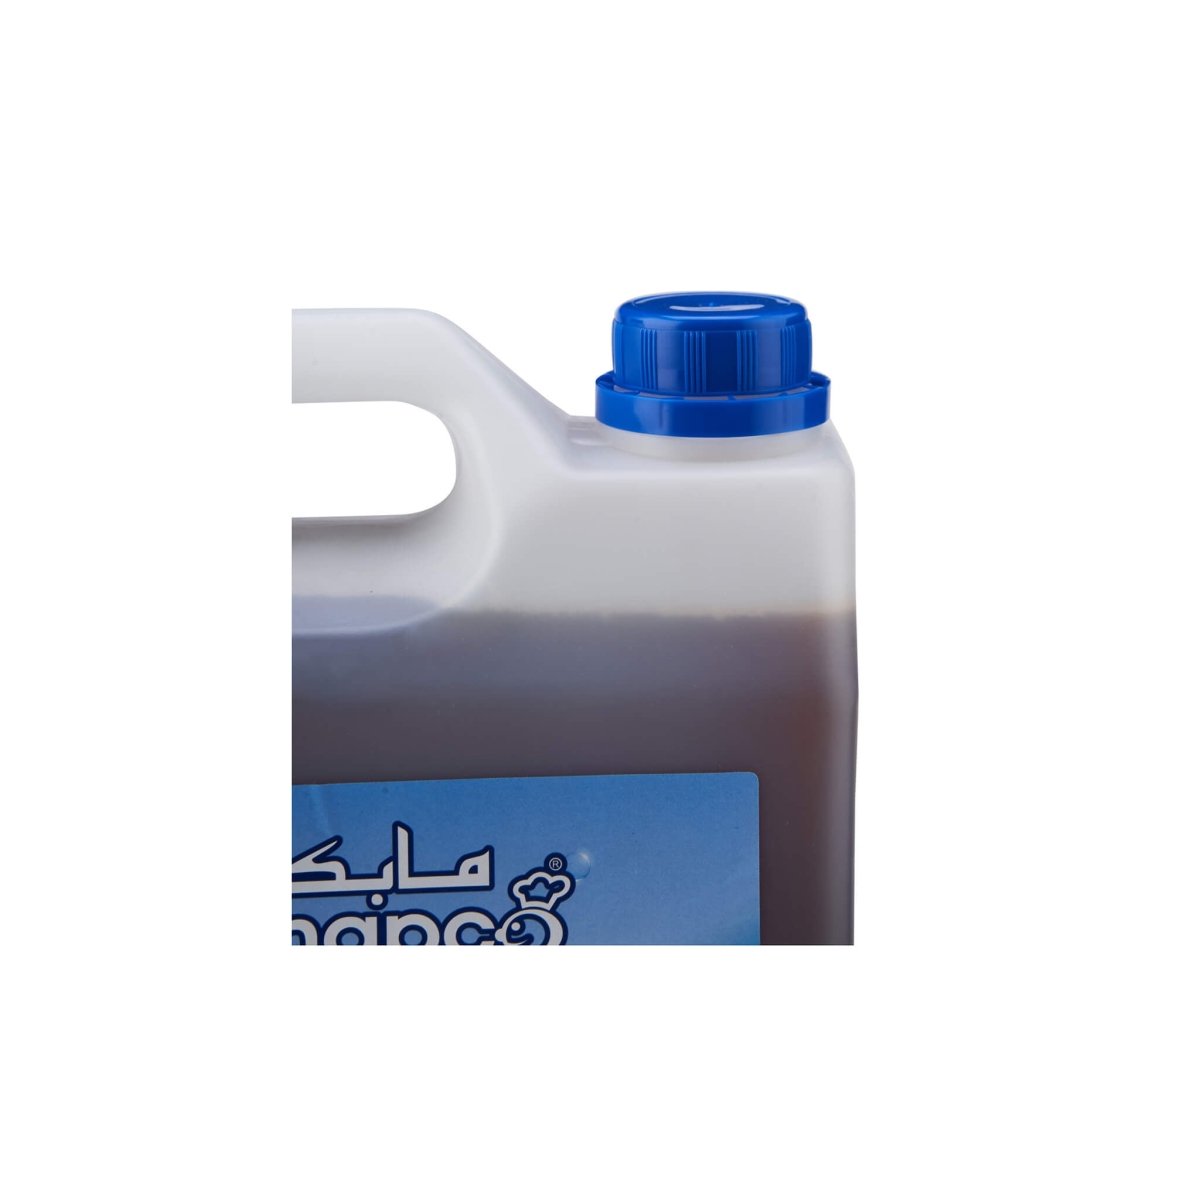 Antiseptic Disinfectant 5 Litre - hotpackwebstore.com - Antiseptic Disinfectant